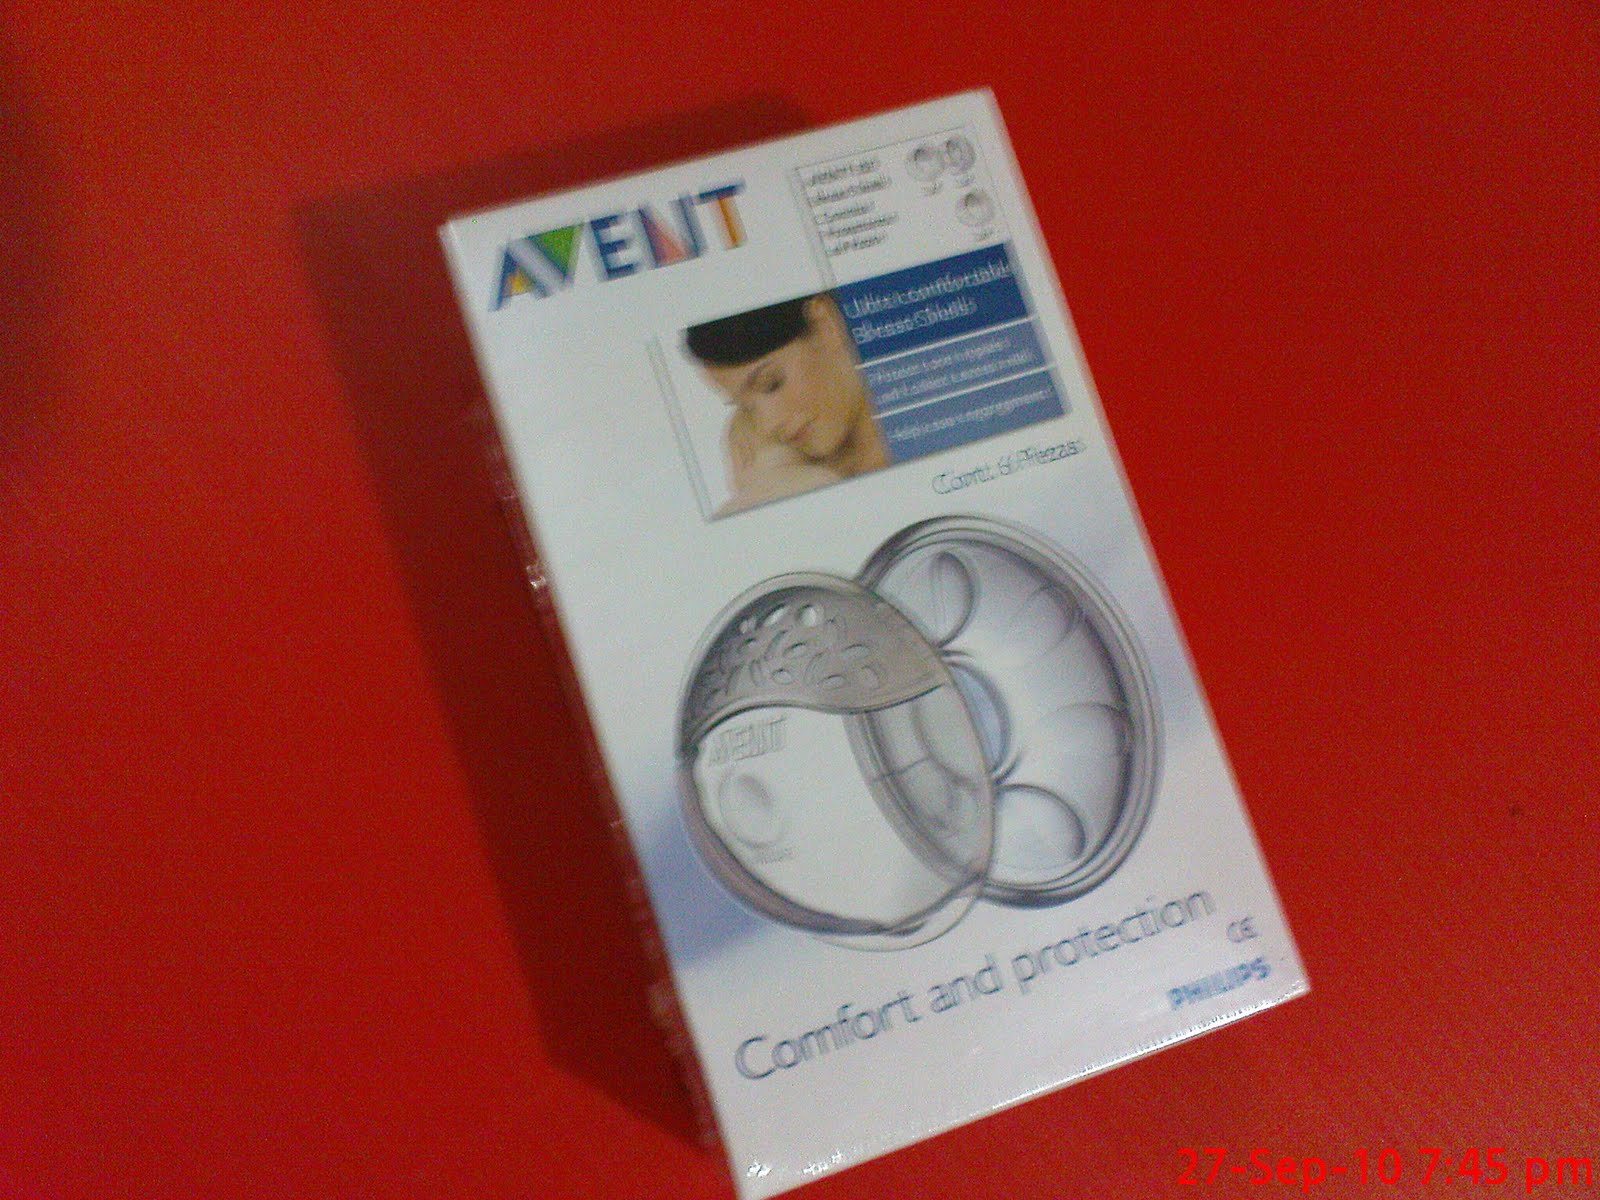 Avent Breast Shell